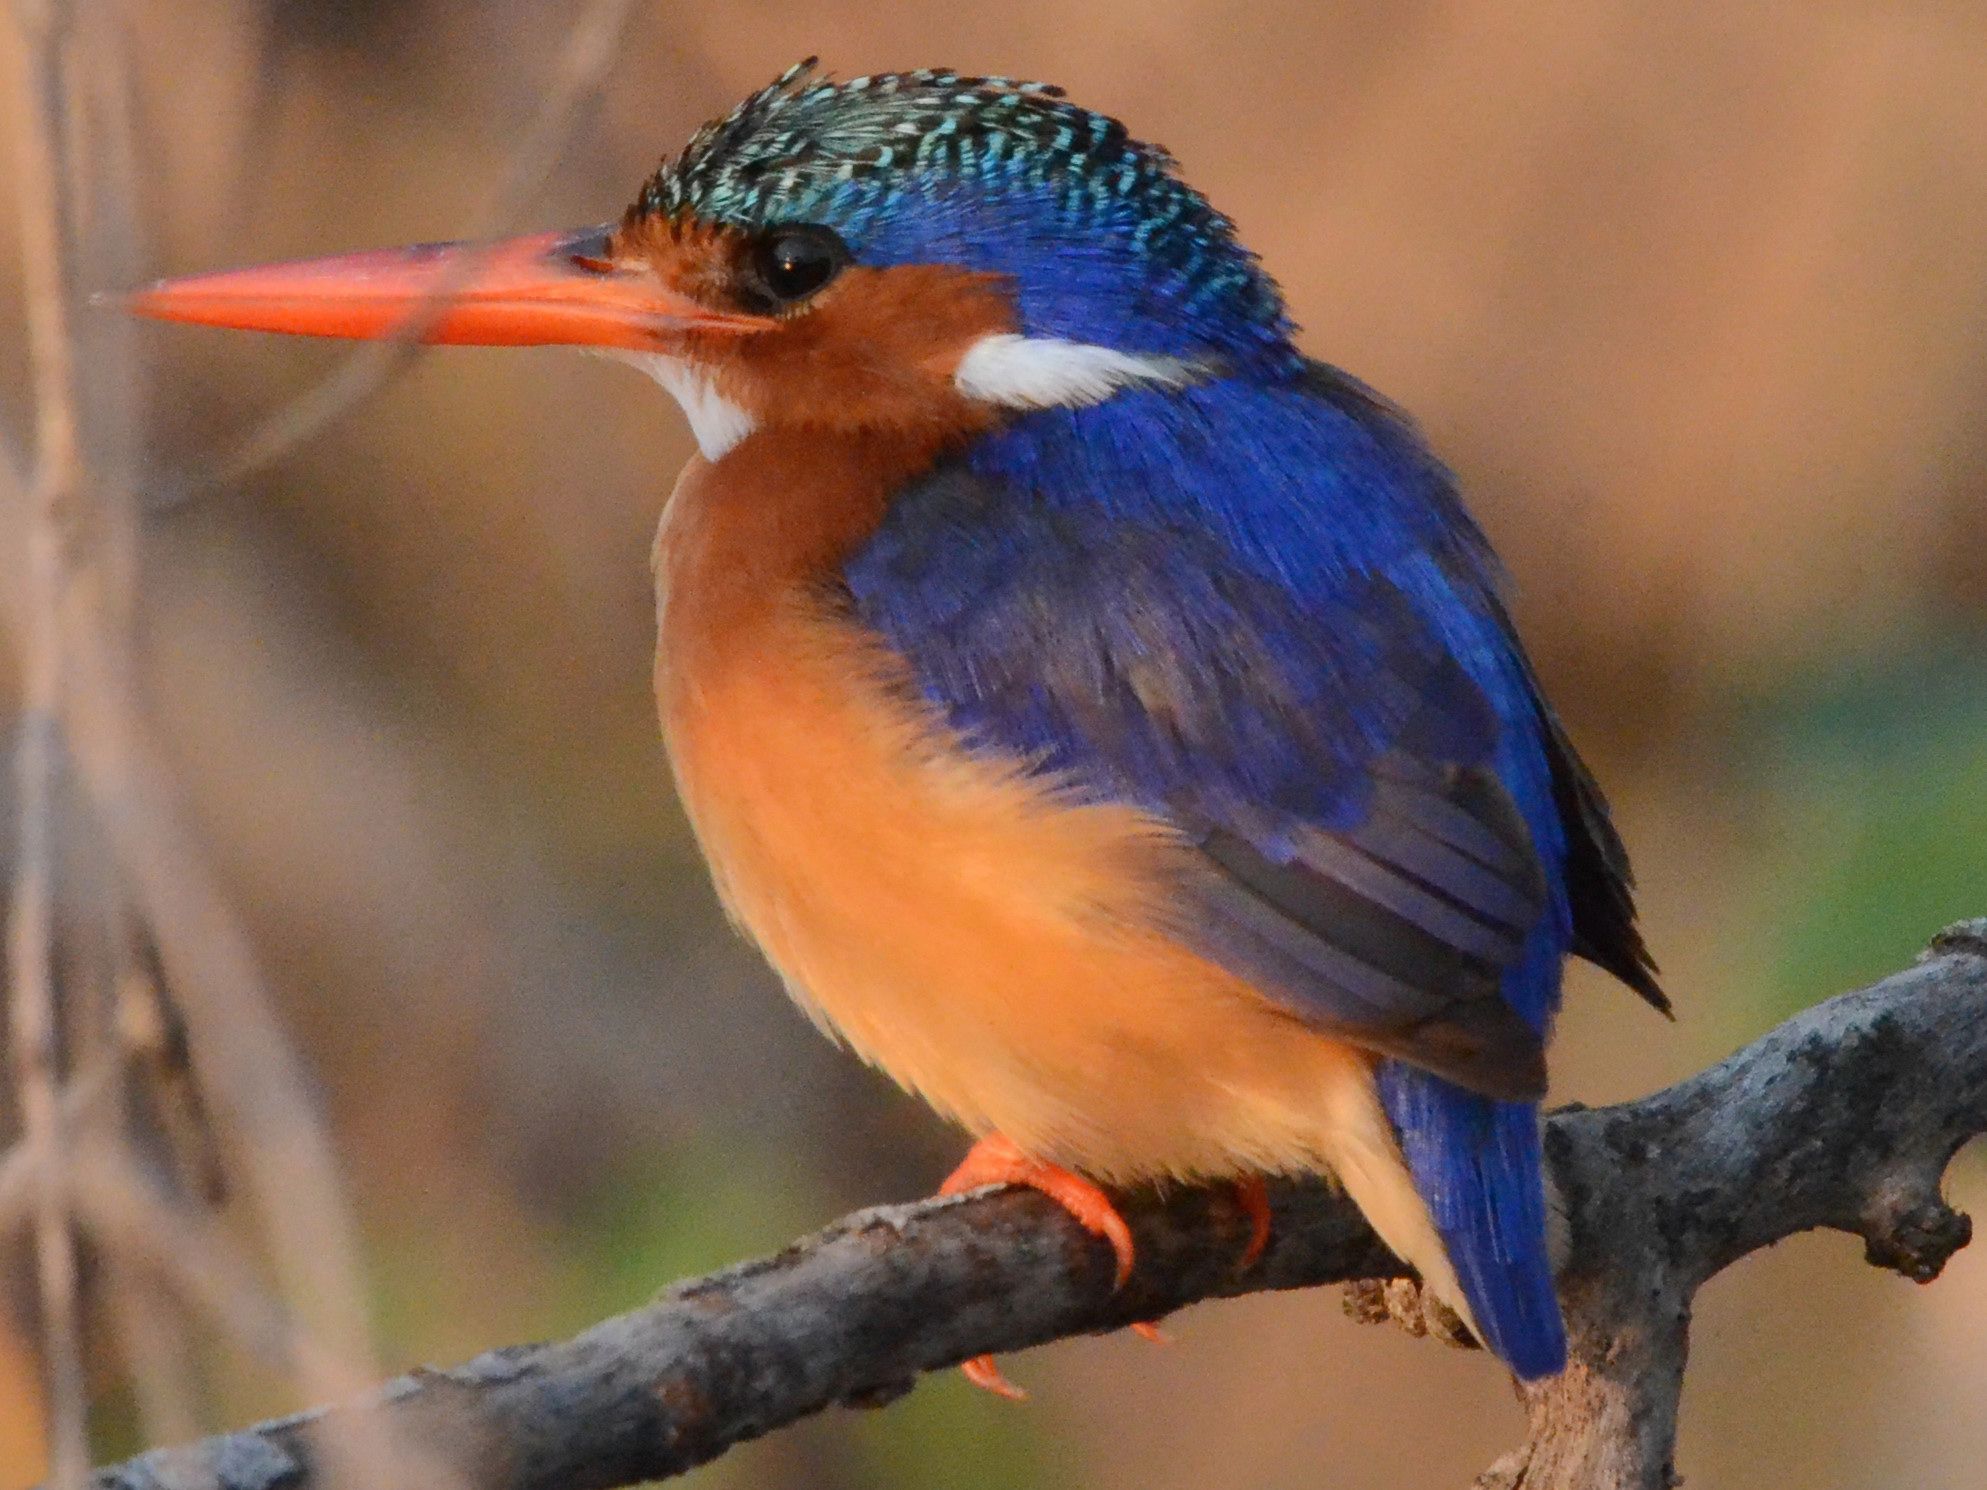 Click picture to see more Malachite Kingfishers.